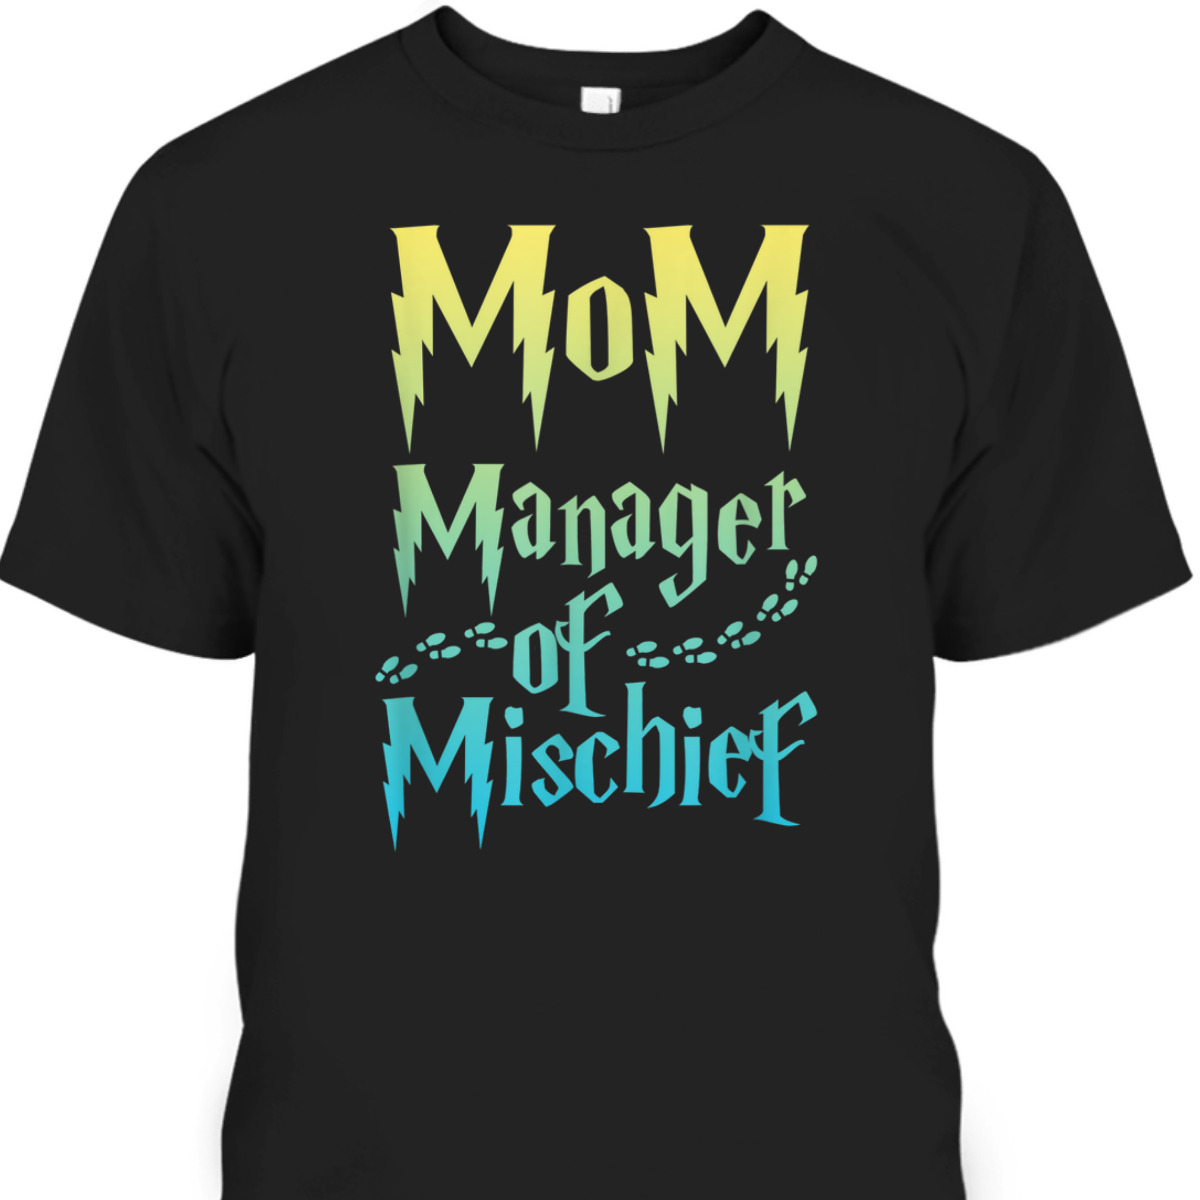 Funny Mother's Day T-Shirt Mom Manager Of Mischief